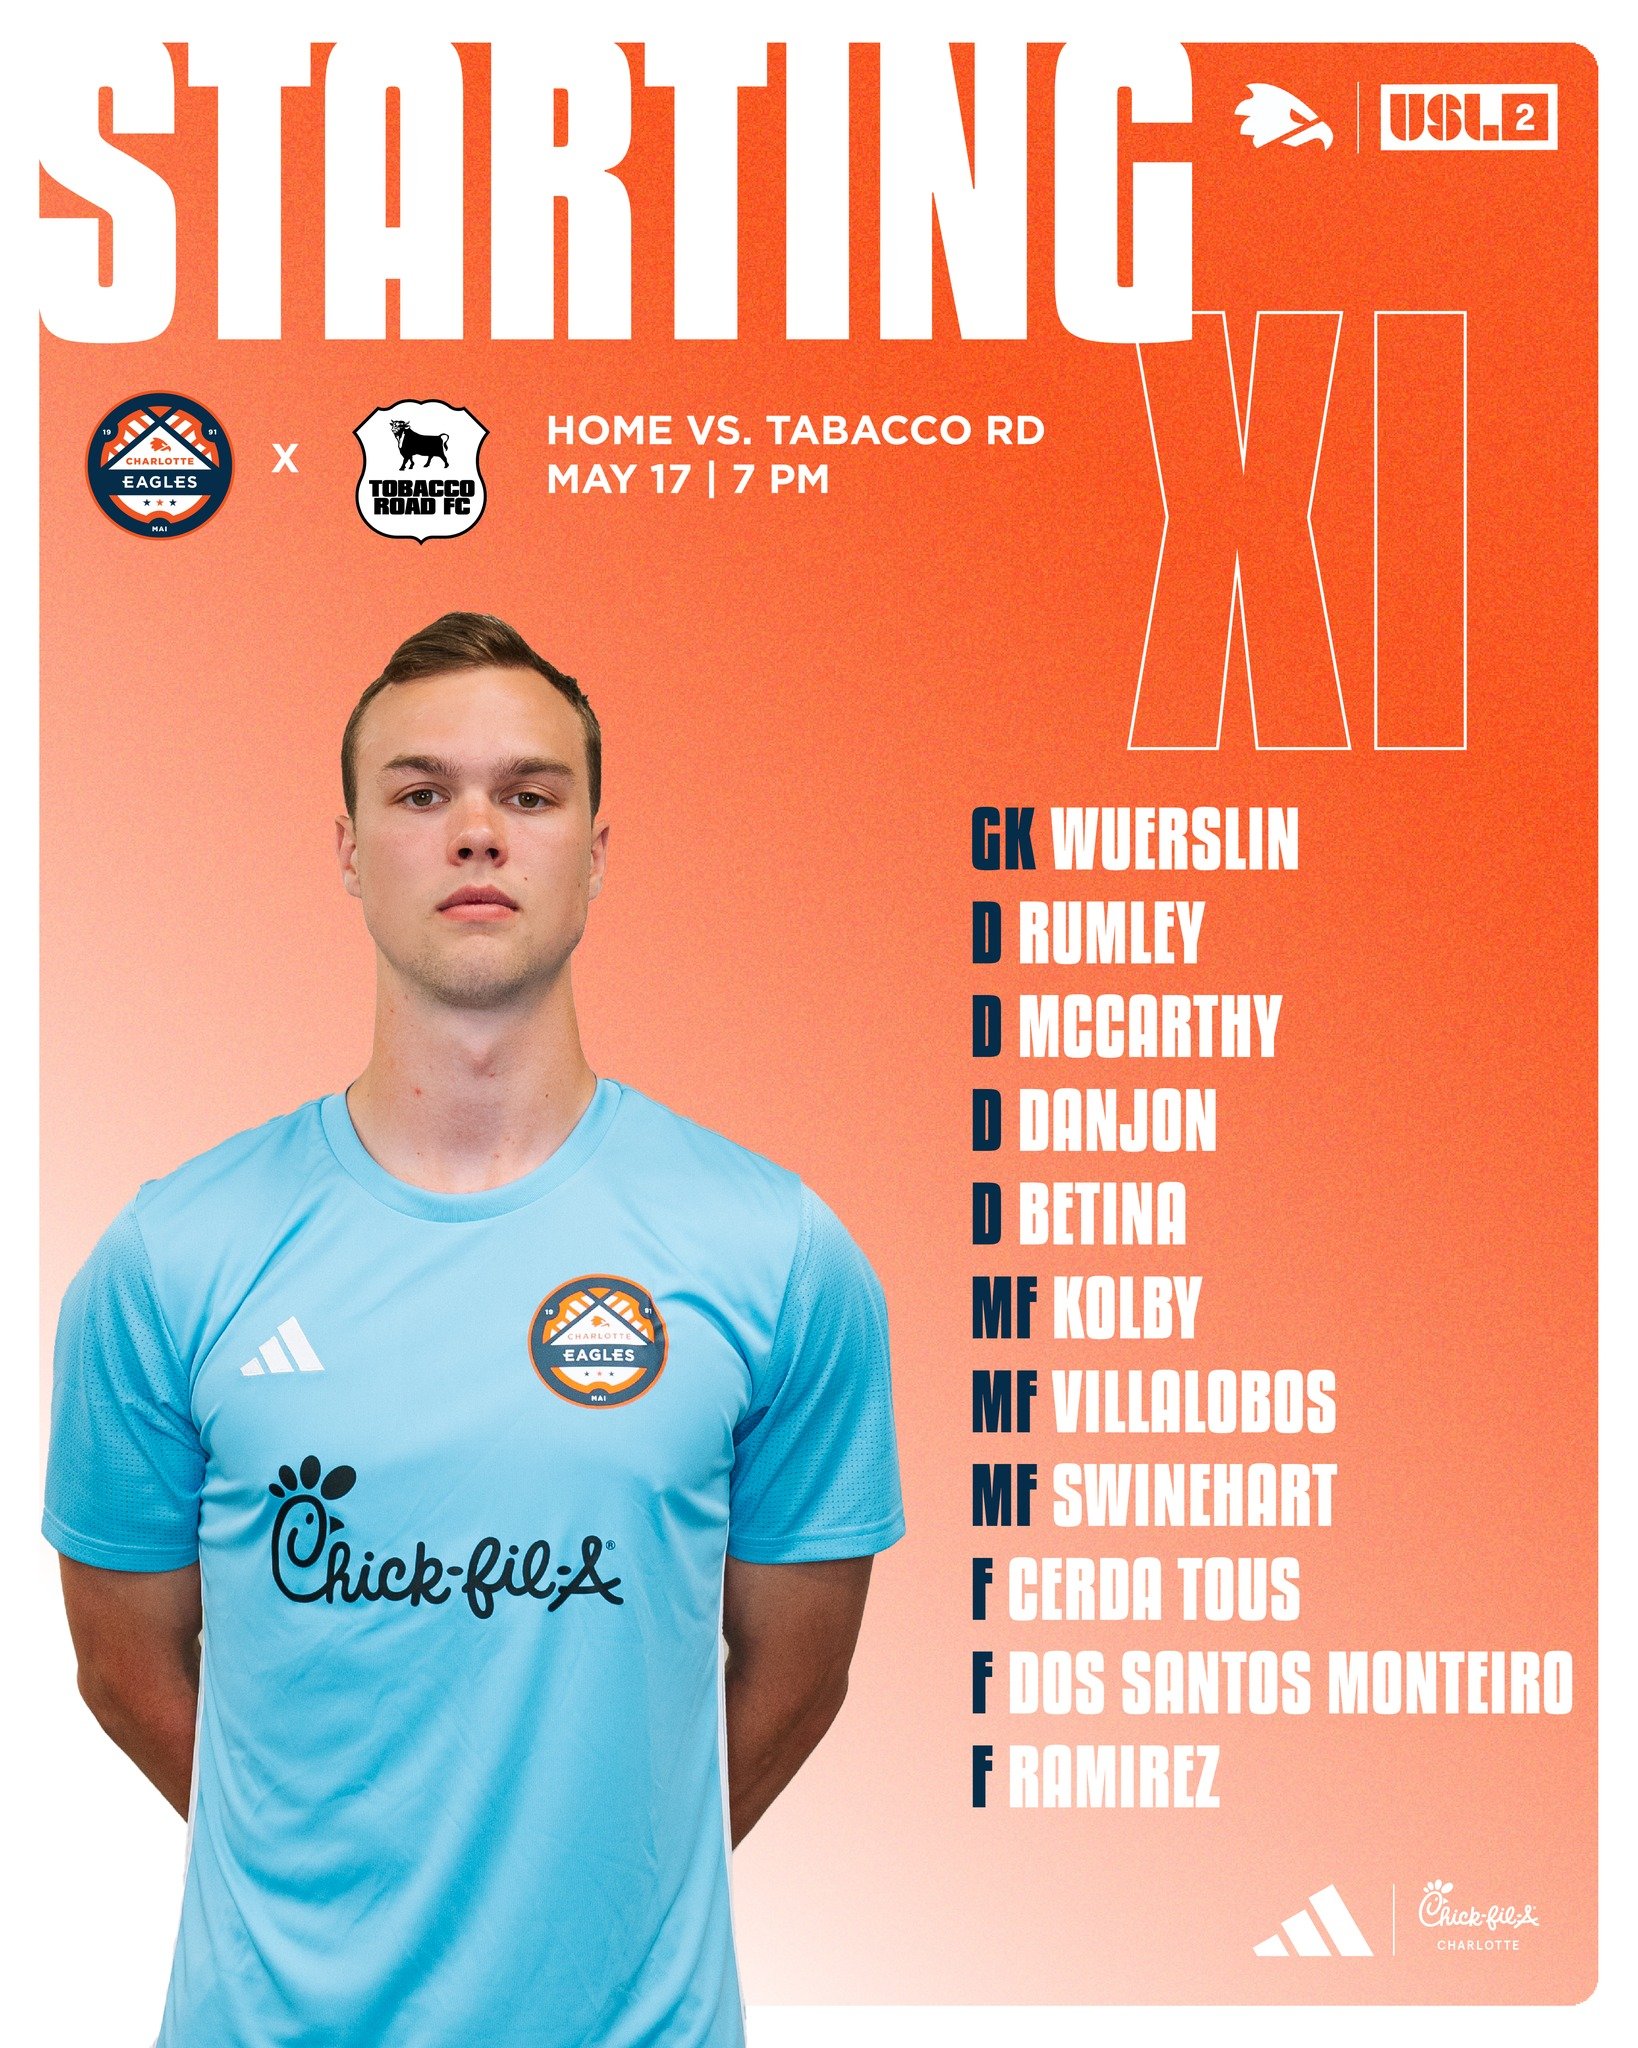 🦅 STARTING XI 🦅

Your staring lineup for the FIRST HOME GAME of the season!

Come out and support at Matthews Sportsplex Field 10 or watch tonight's match live on the link in our profile! 🔗 Game starts at 7 PM! 

#SoliDeoGloria #Path2Pro